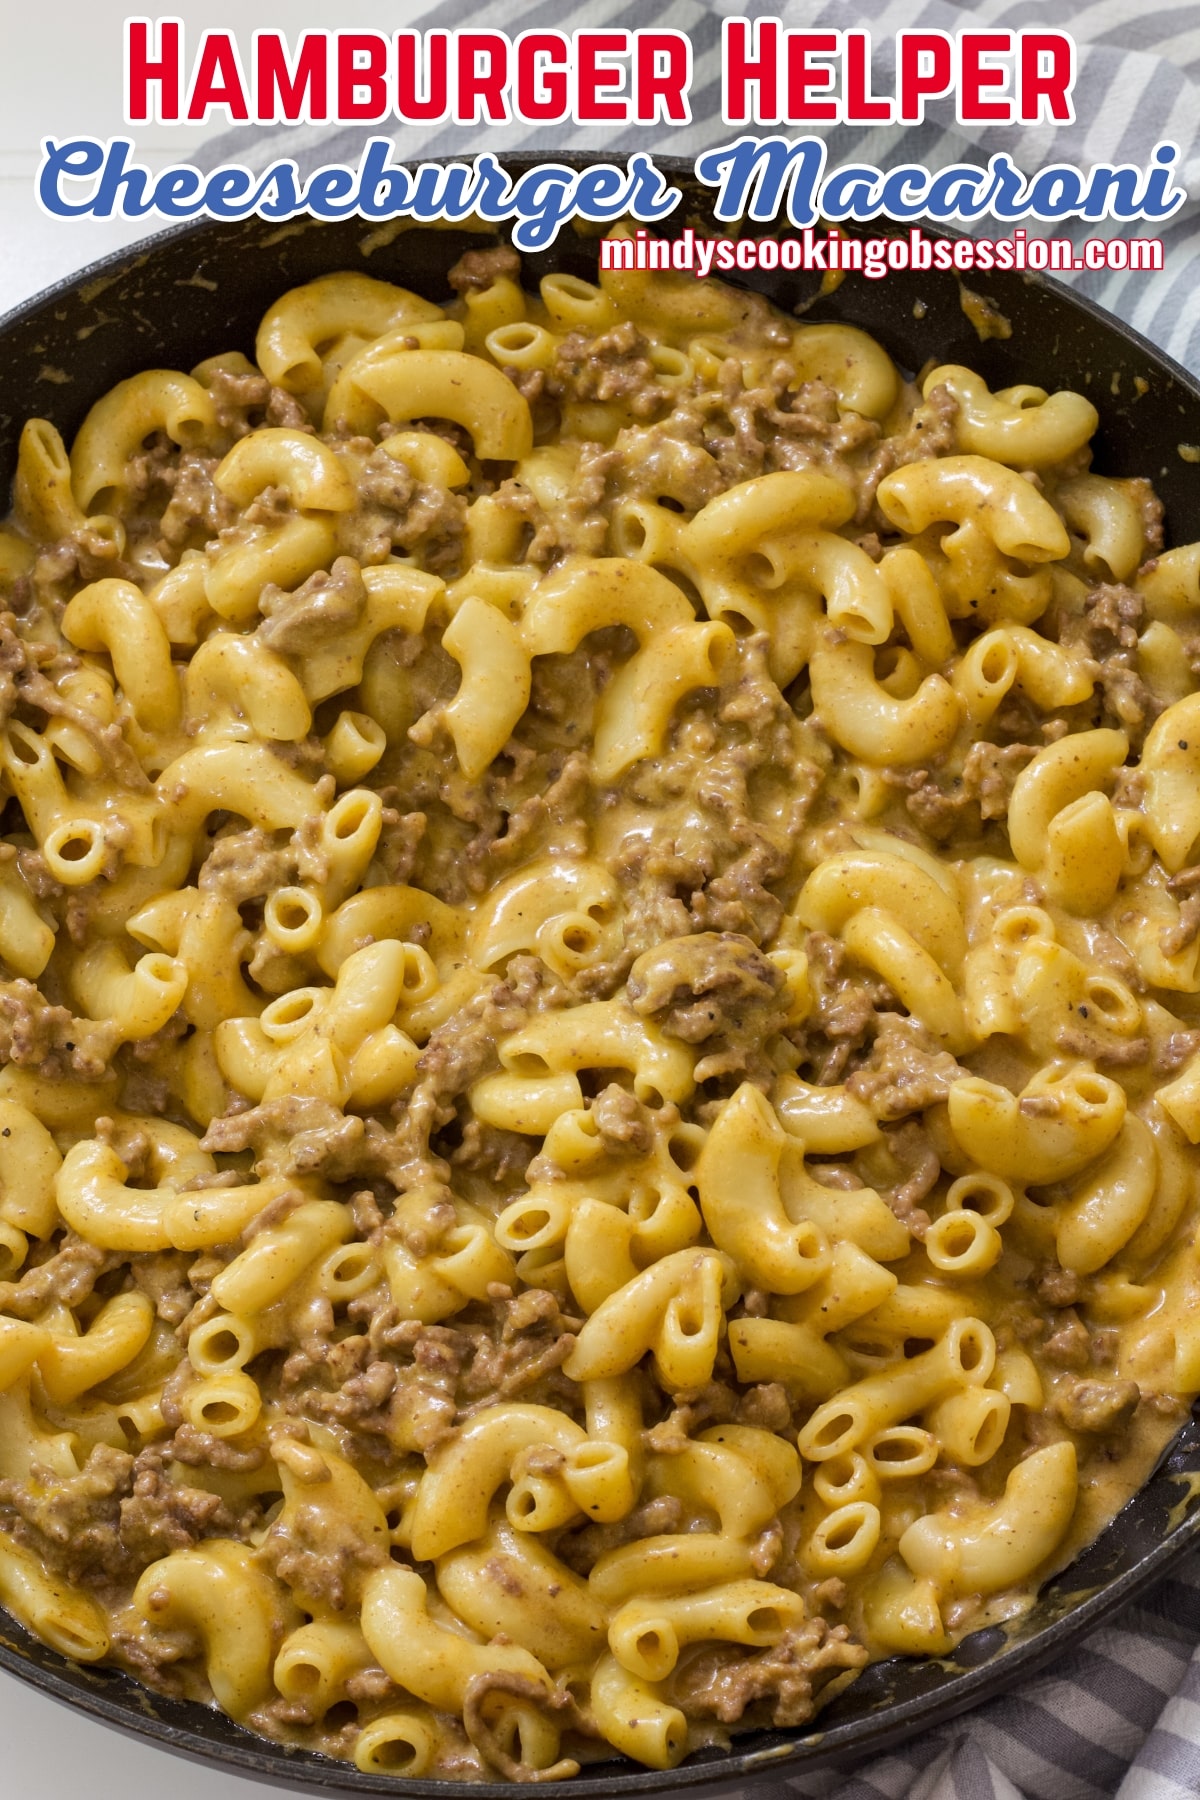 Copycat Cheeseburger Macaroni Hamburger Helper is just as easy to make as the popular boxed dinner! Plus, it is a better for you healthier version. All you need are a few simple ingredients you probably already have in your pantry. It's the perfect go-to dinner for busy weeknights because it is made in one pan and on the table in about 30 minutes! Super kid friendly and also a big hit with adults. A great recipe for beginner cooks as well as the more experienced cook. via @mindyscookingobsession